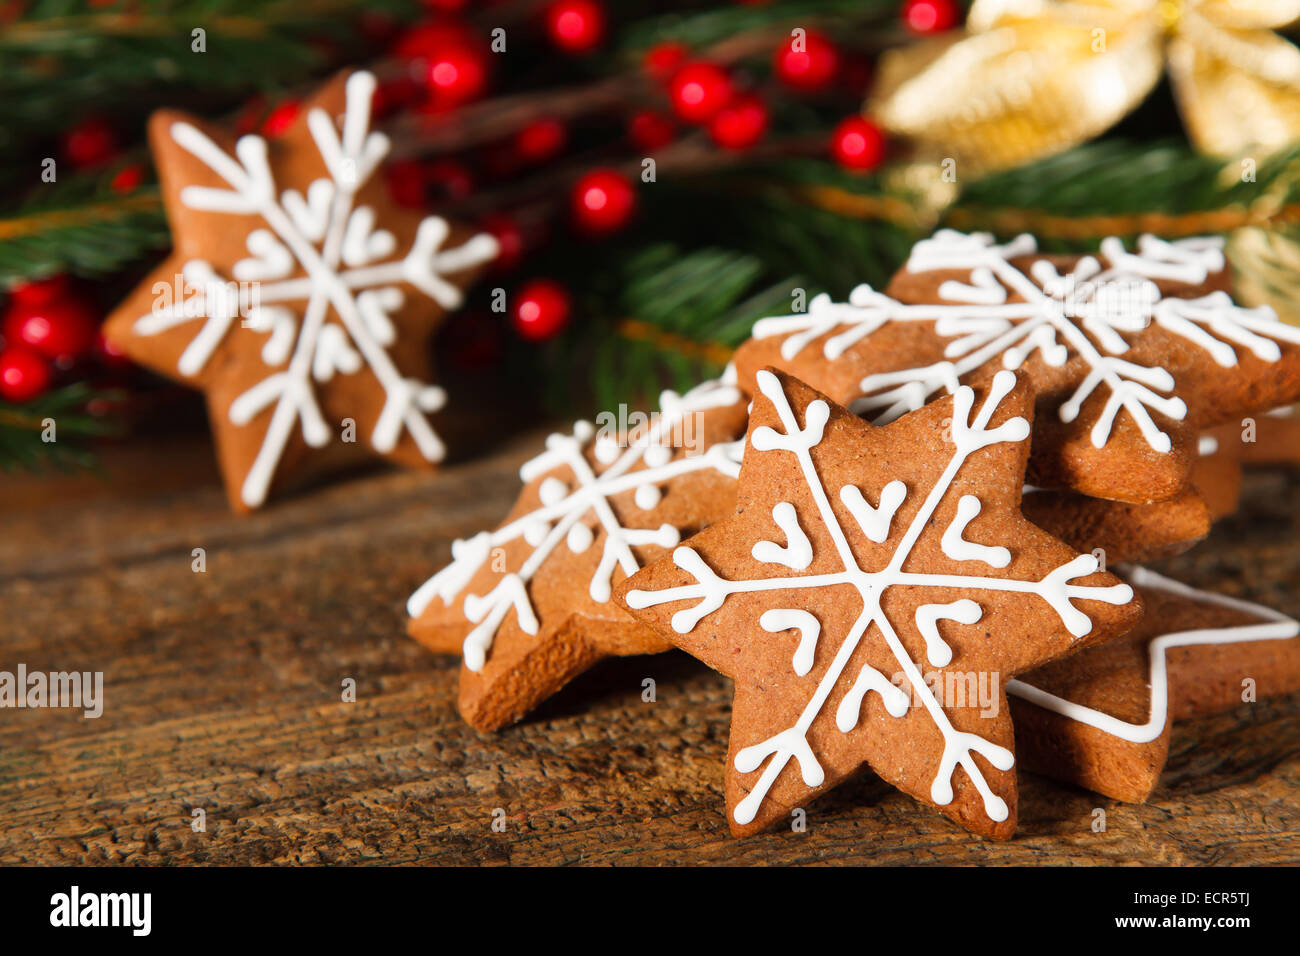 Christmas composition - gingerbread cookies on wooden table Stock Photo